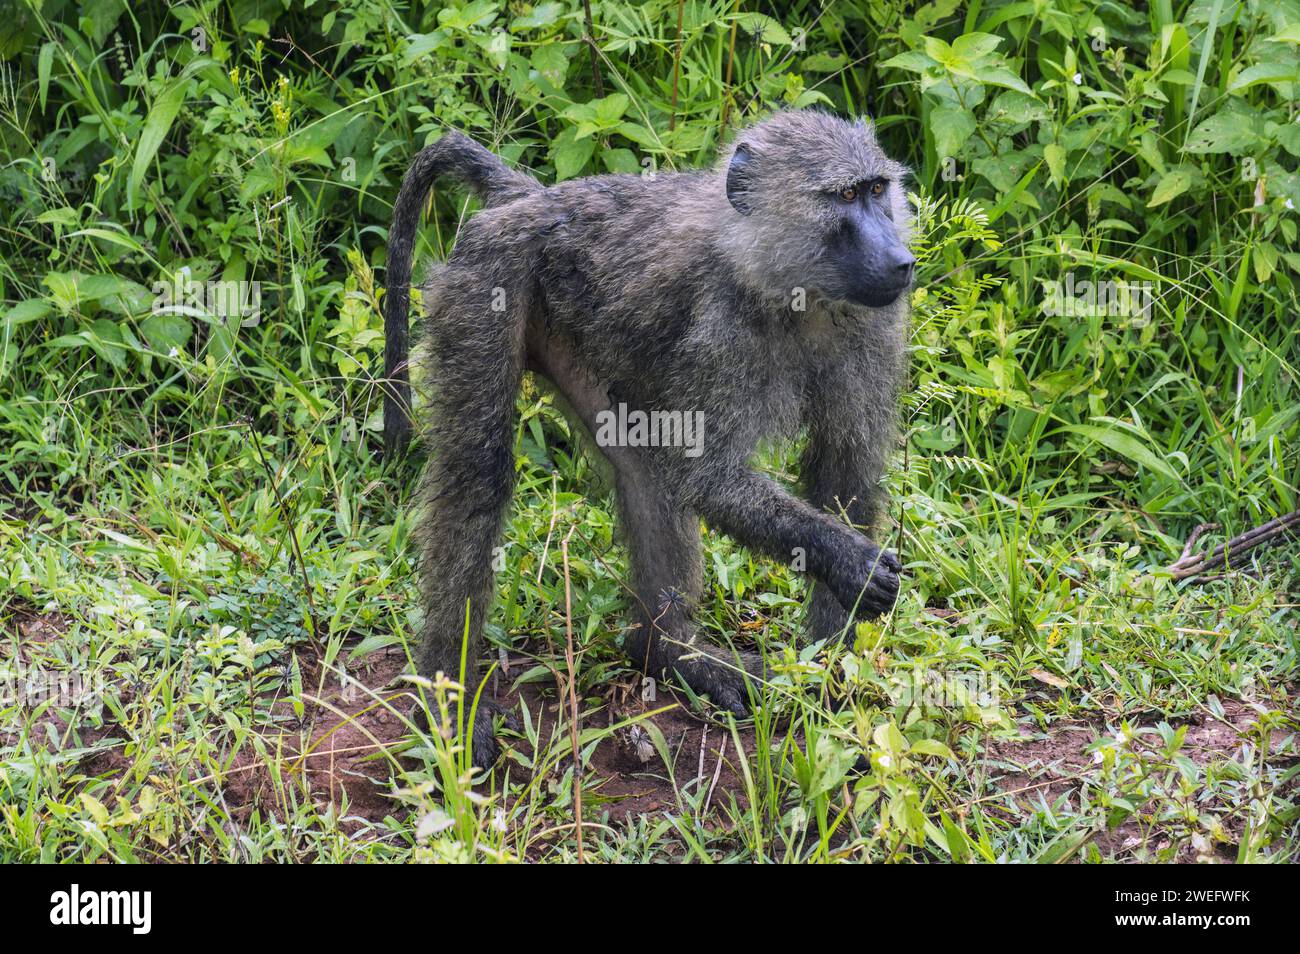 Baboon photographed on safari in Akagera National Park in Northeastern Rwanda, Central Africa’s largest protected wetland. Africa Parks Stock Photo